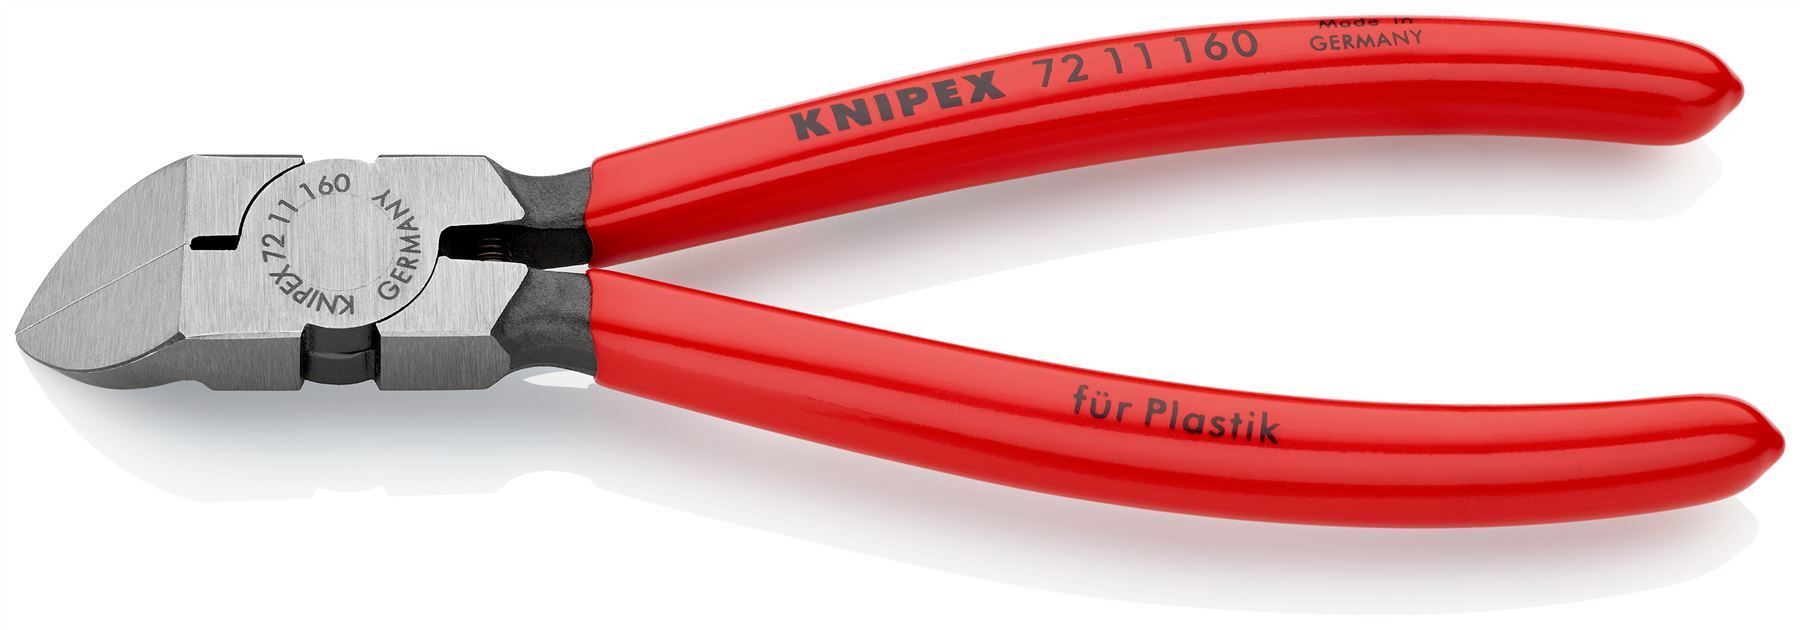 Knipex Diagonal Side Cutters for Plastics 160mm 45° Cutting Pliers Grips 72 11 160